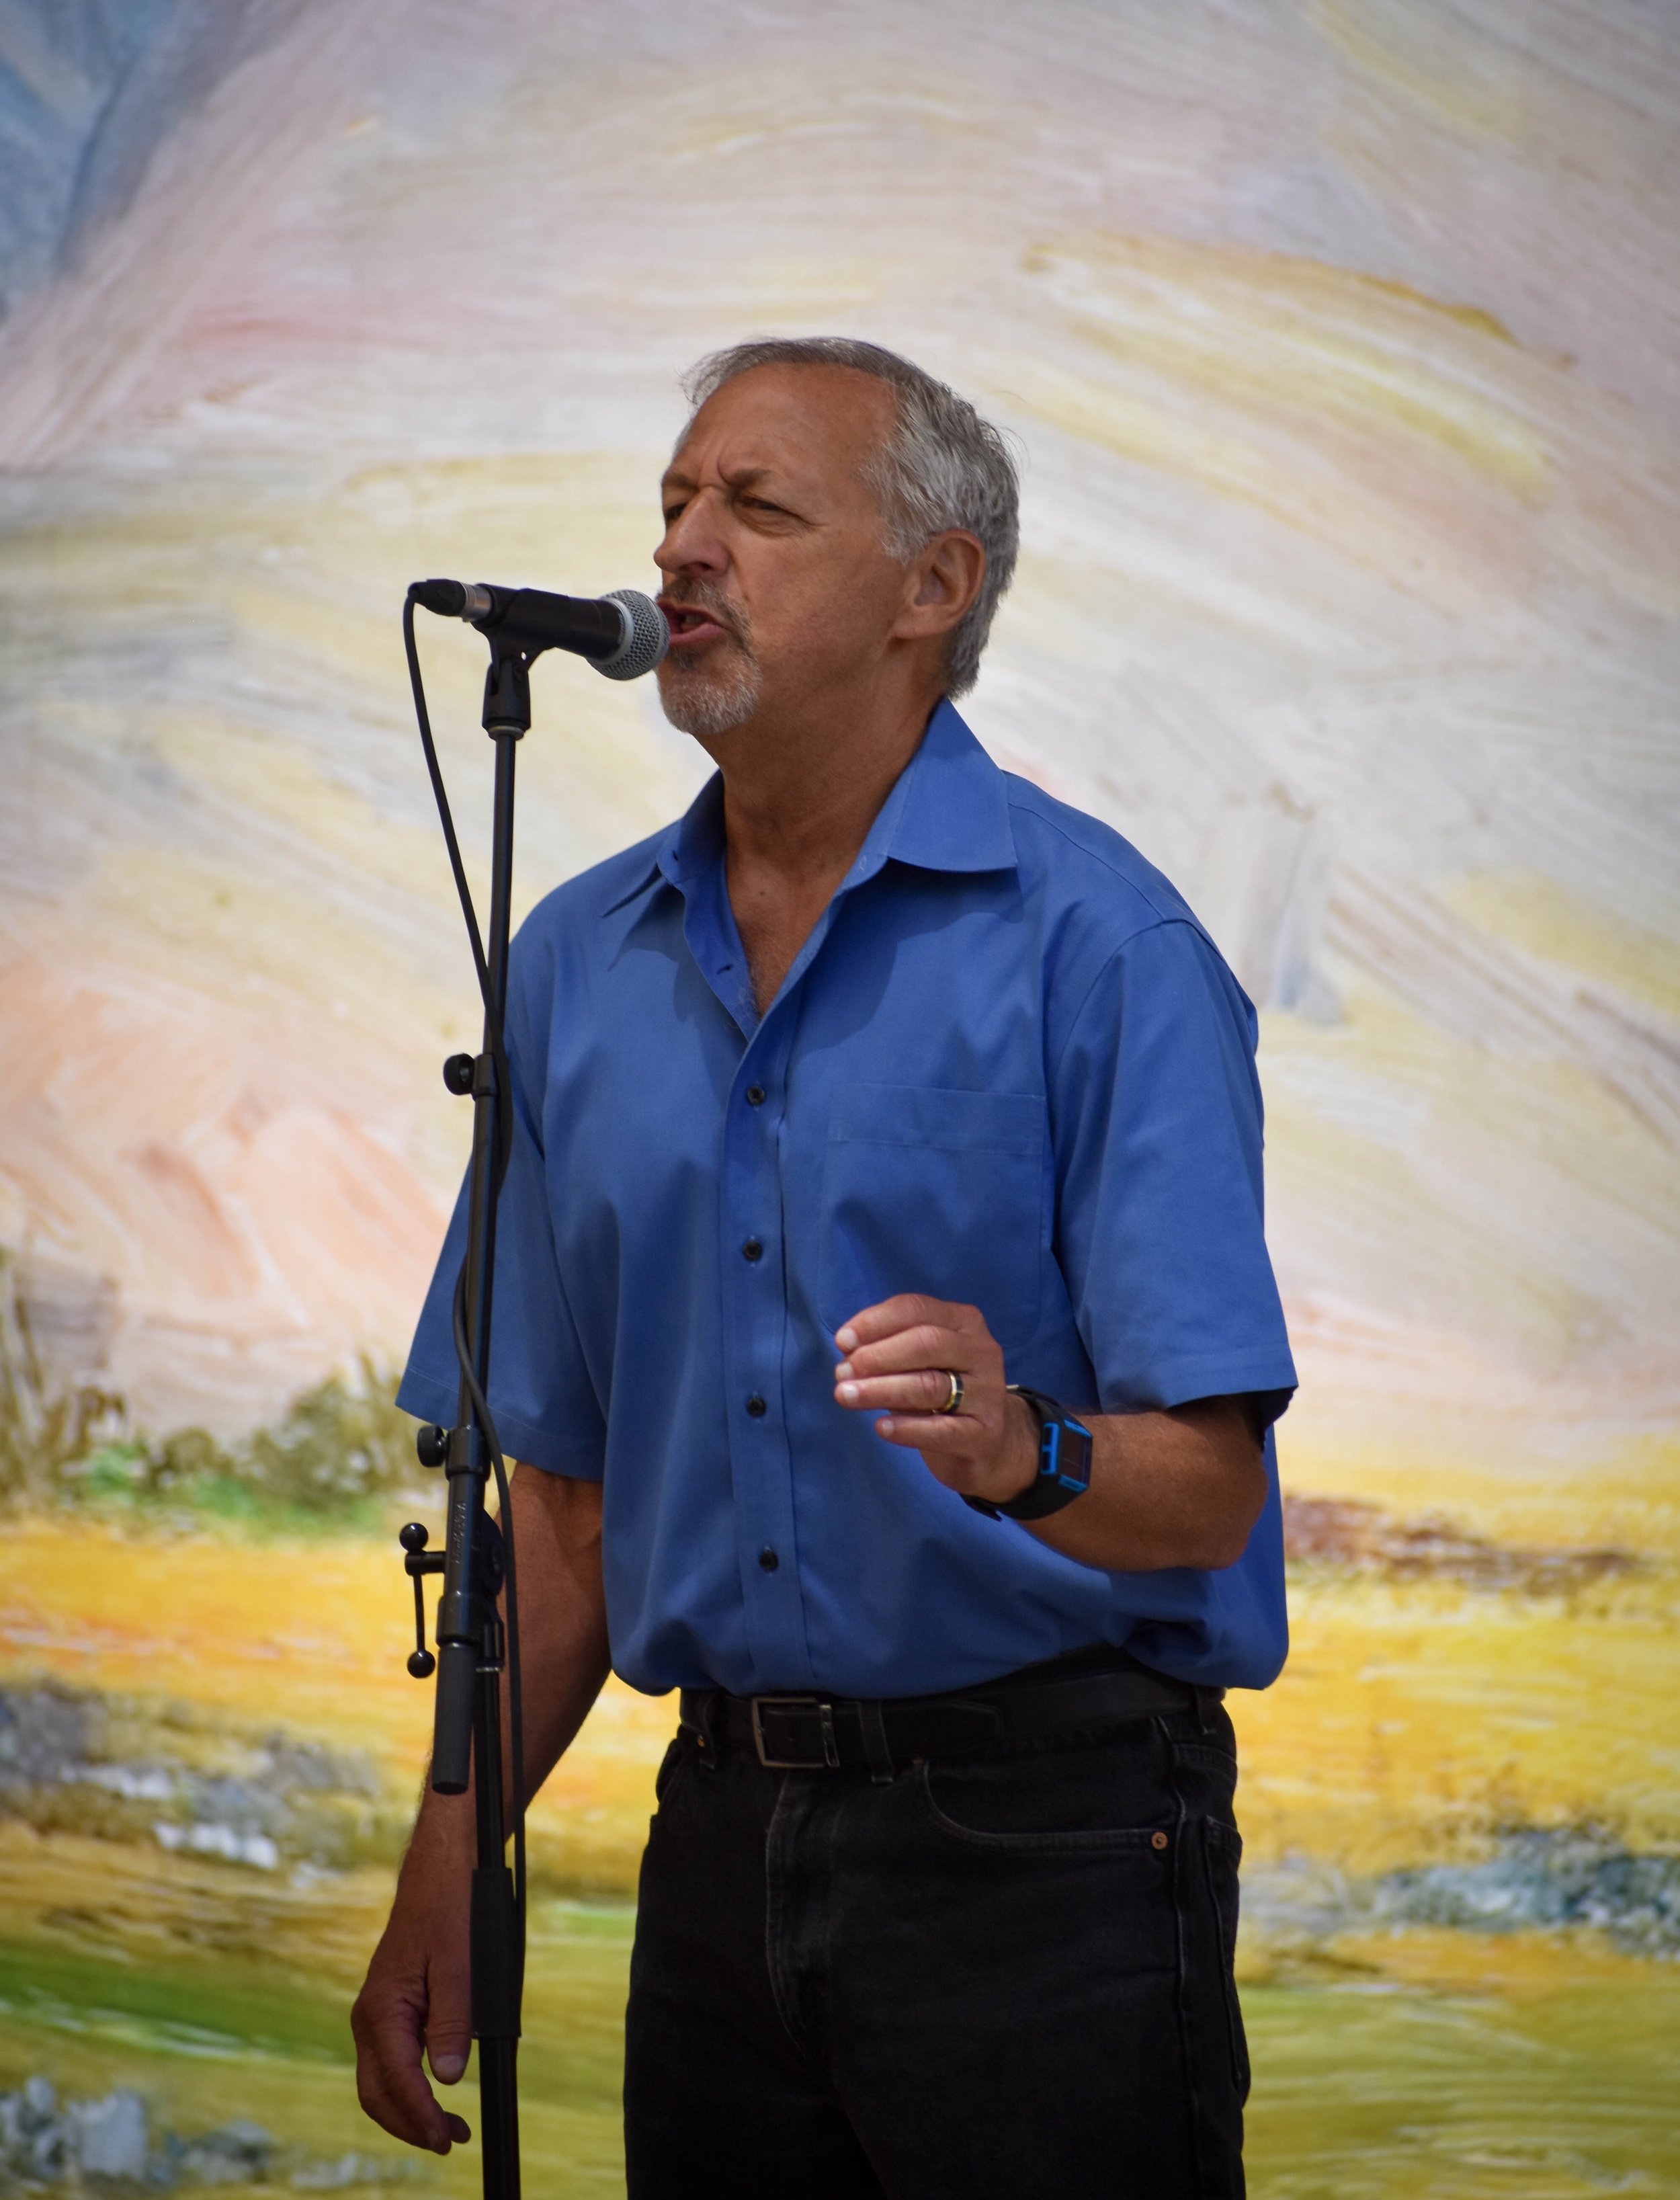 07-17-2022 LCCB Fest of Arts Summer Concert Series by Peyton Webster14-8.jpg